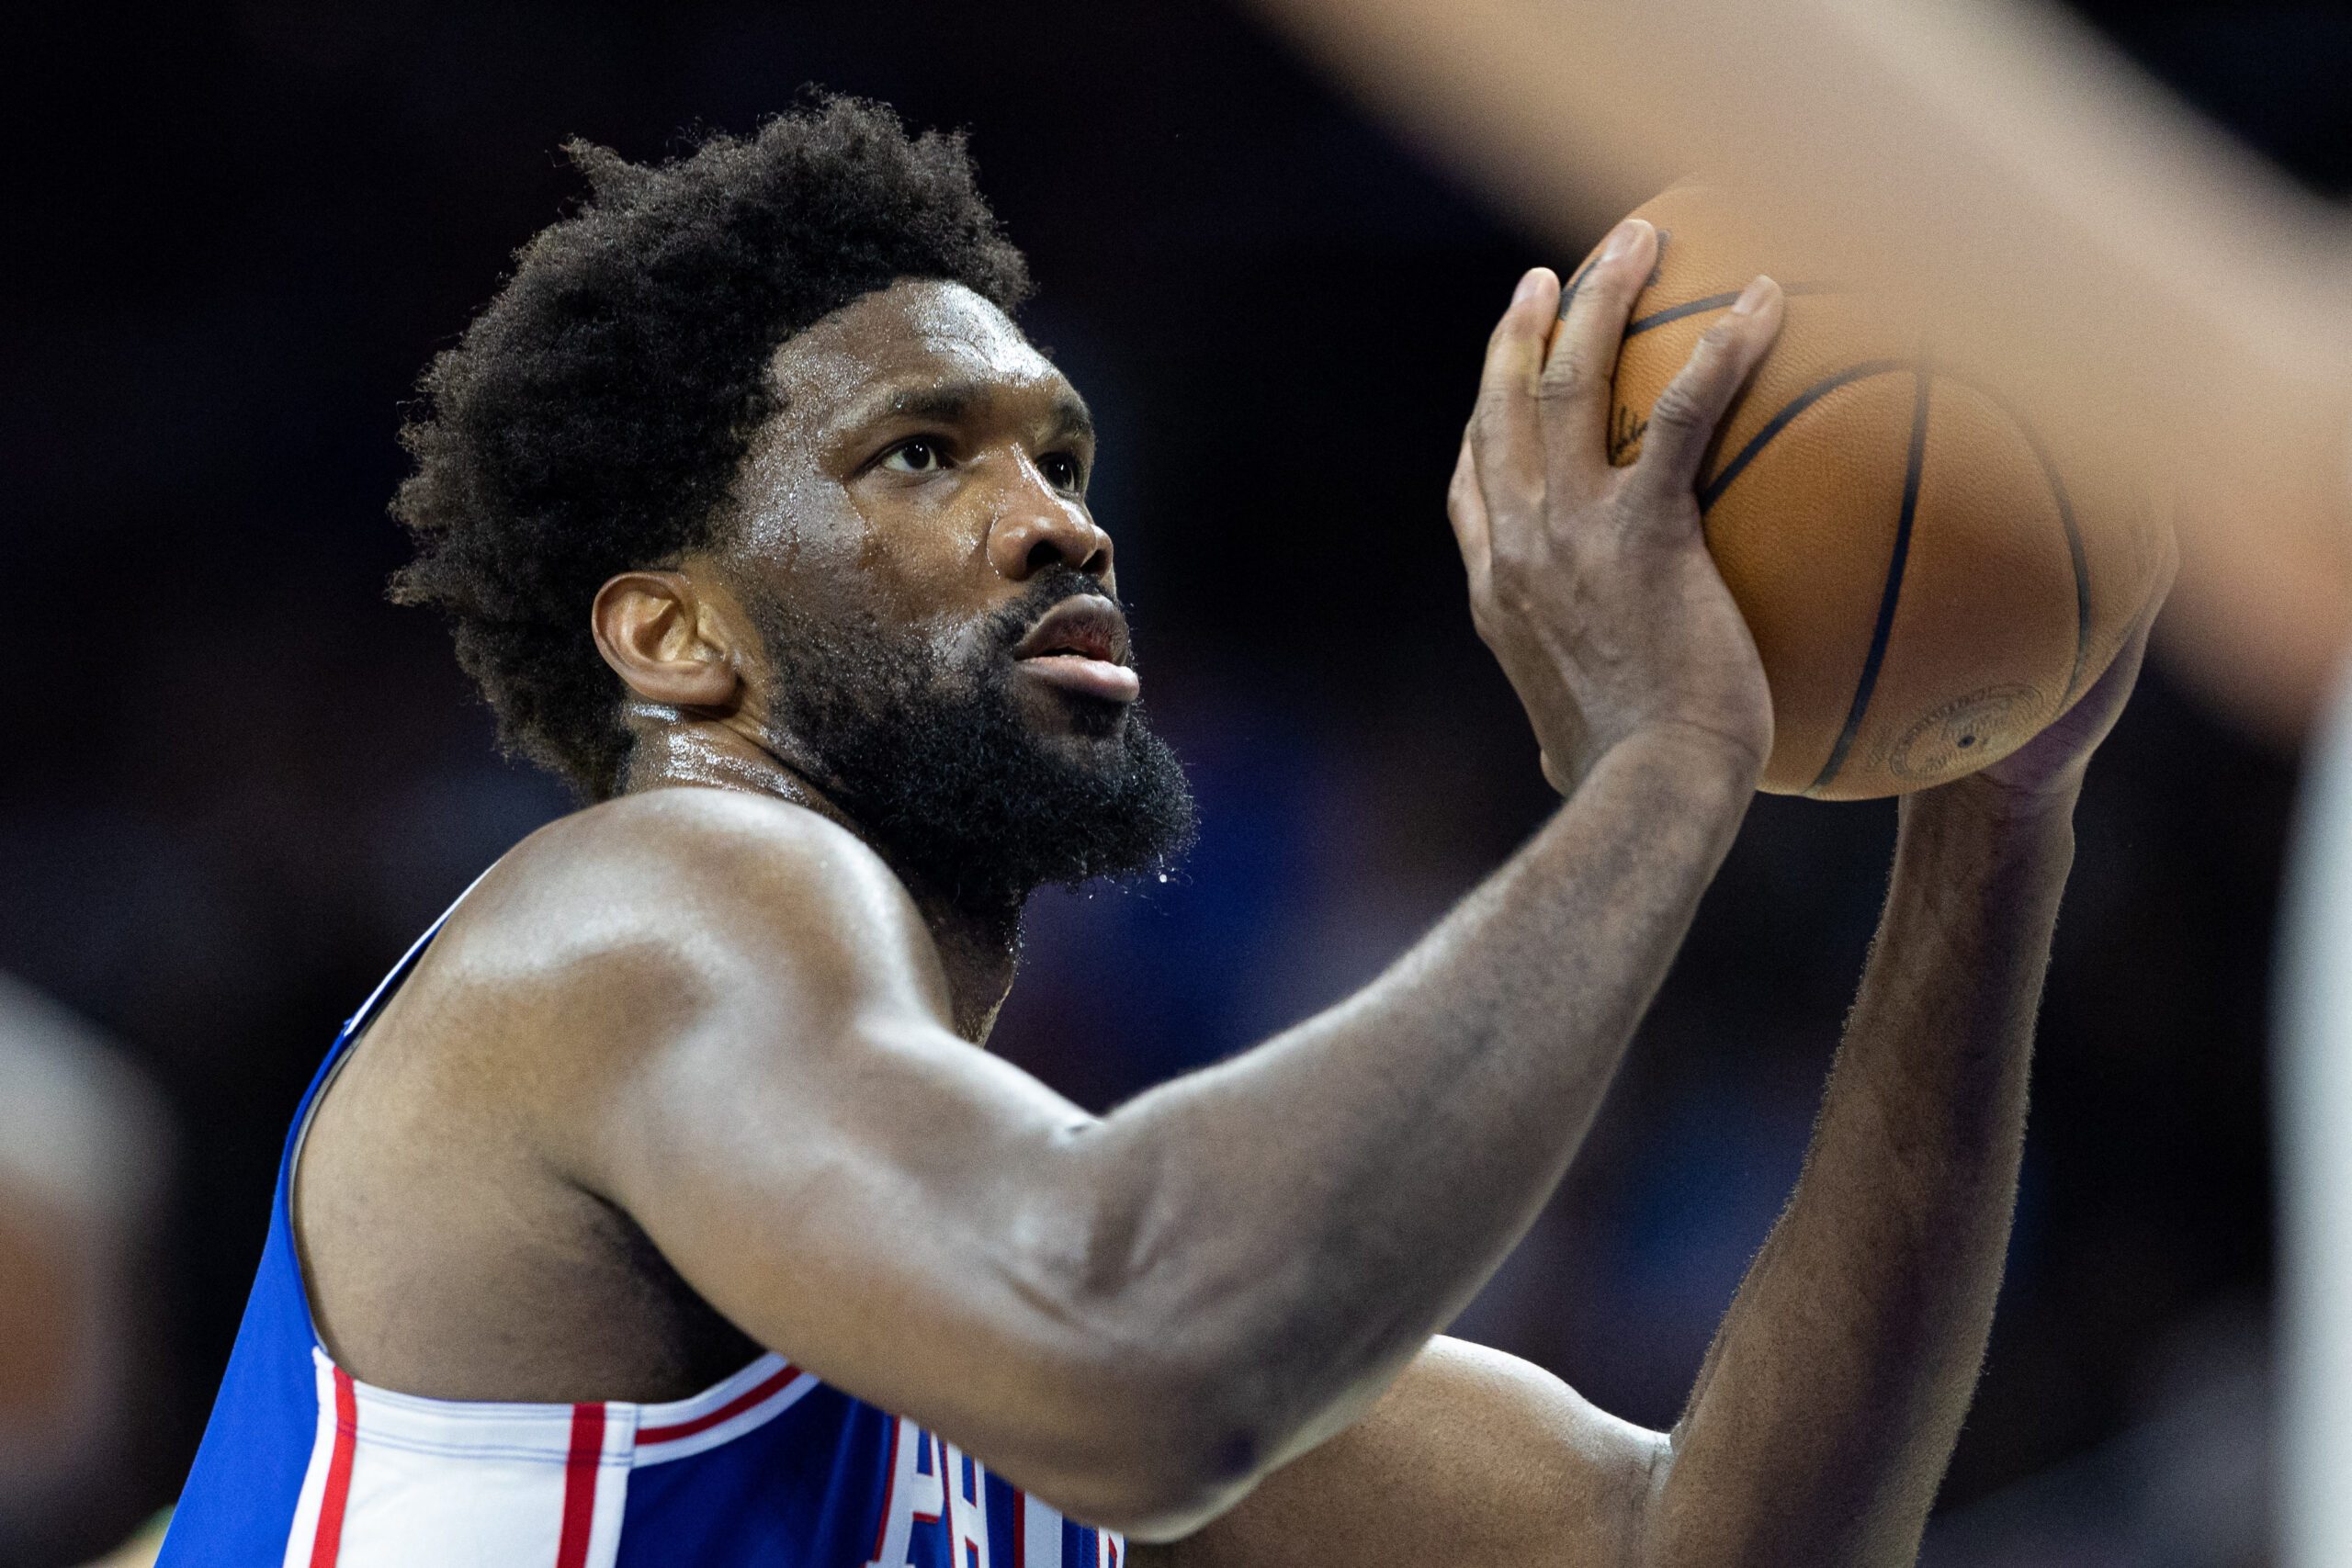 Joel Embiid's 'improbable' journey from newcomer to NBA MVP